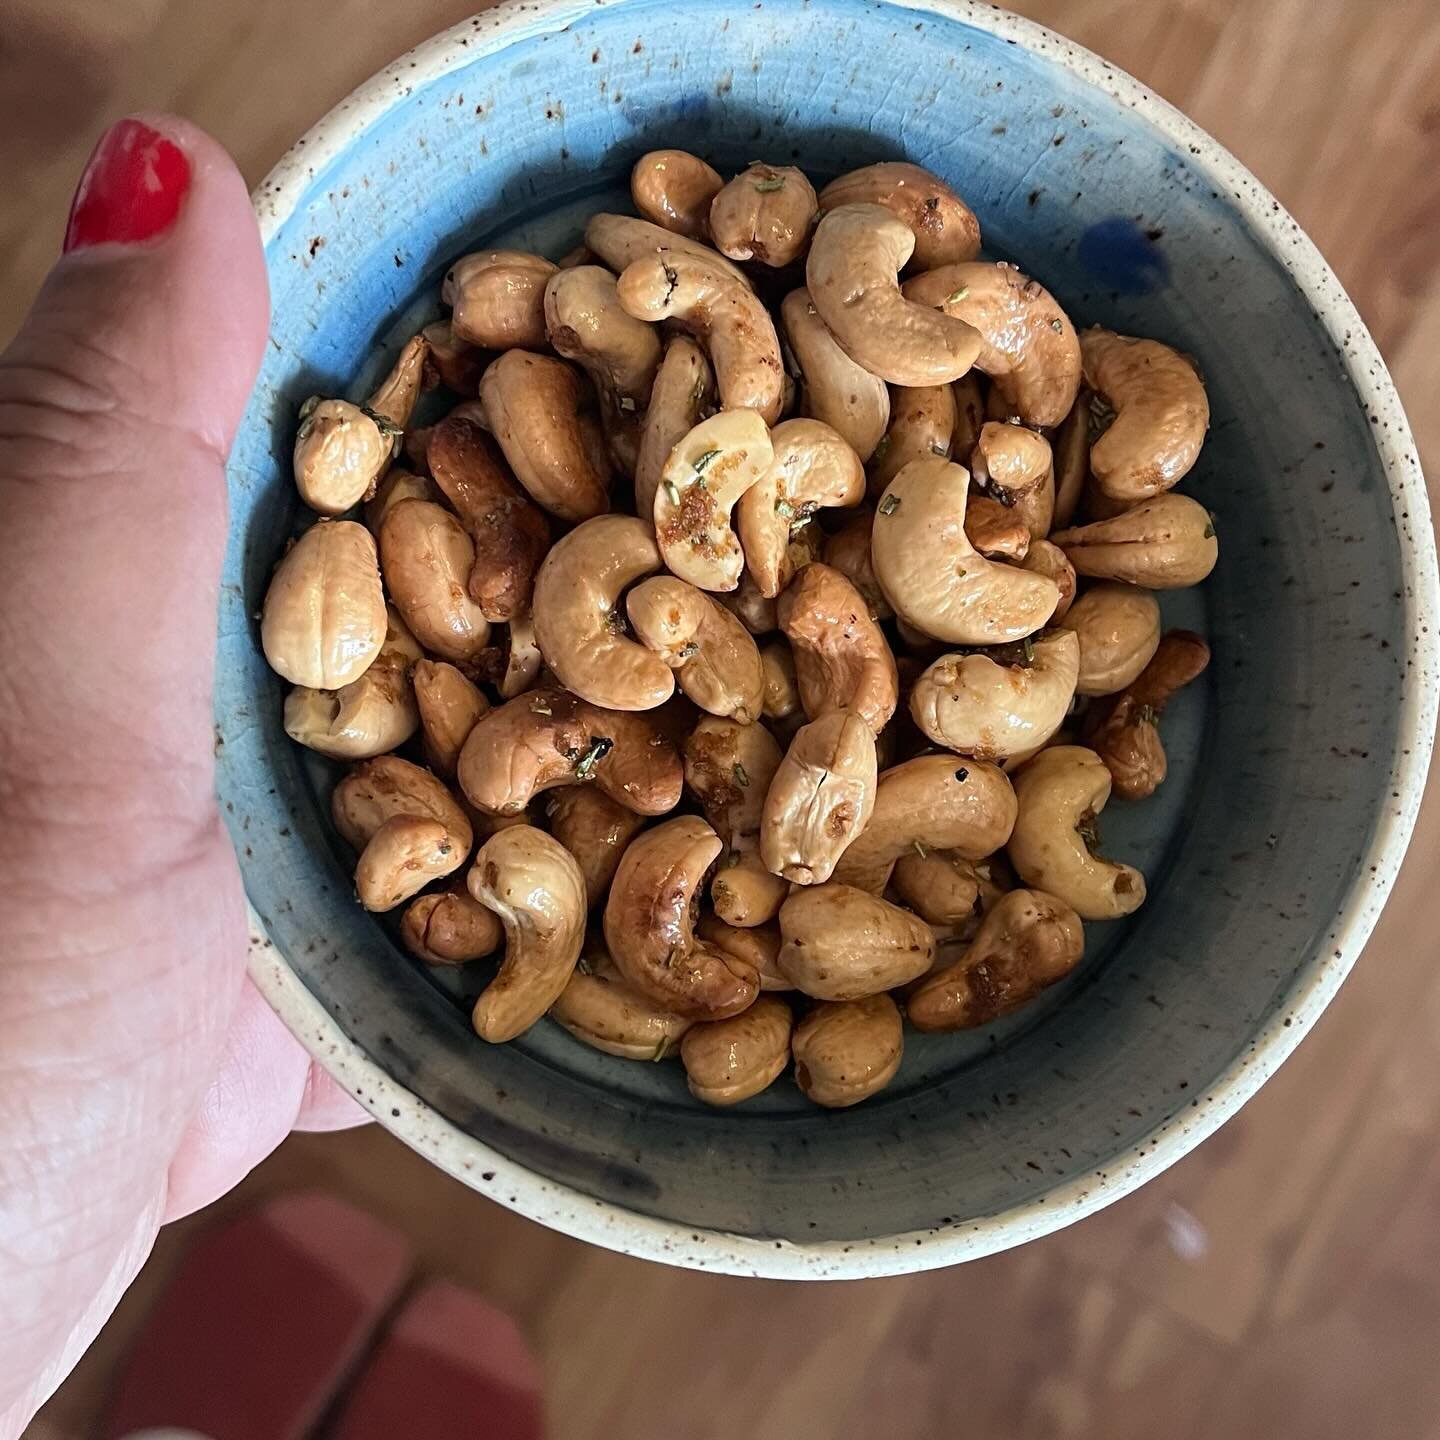 There were a few holiday traditions that I had to skip this year, but spicing cashews wasn&rsquo;t one of them.